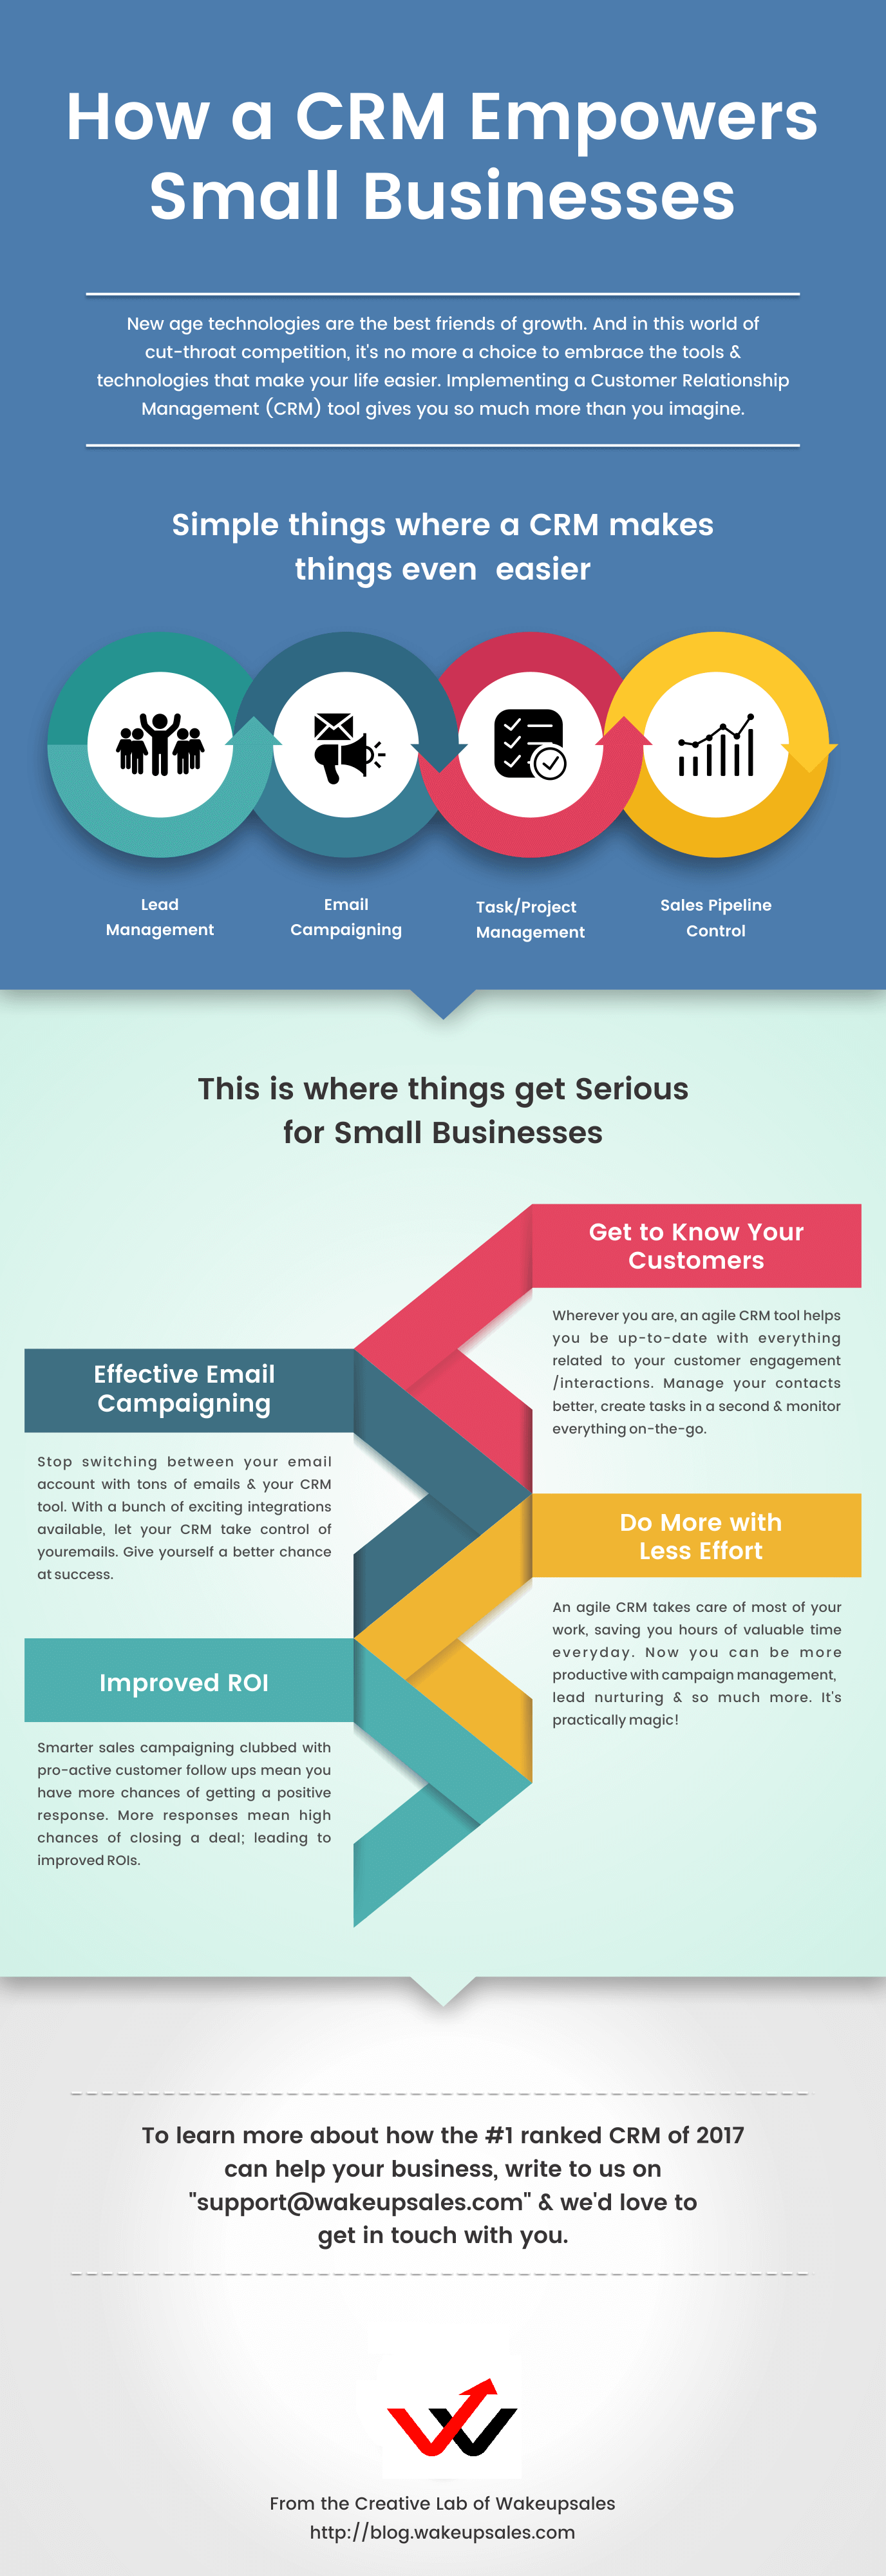 How a CRM Empowers Small BusinessesWhy Small Businesses Need A CRM App